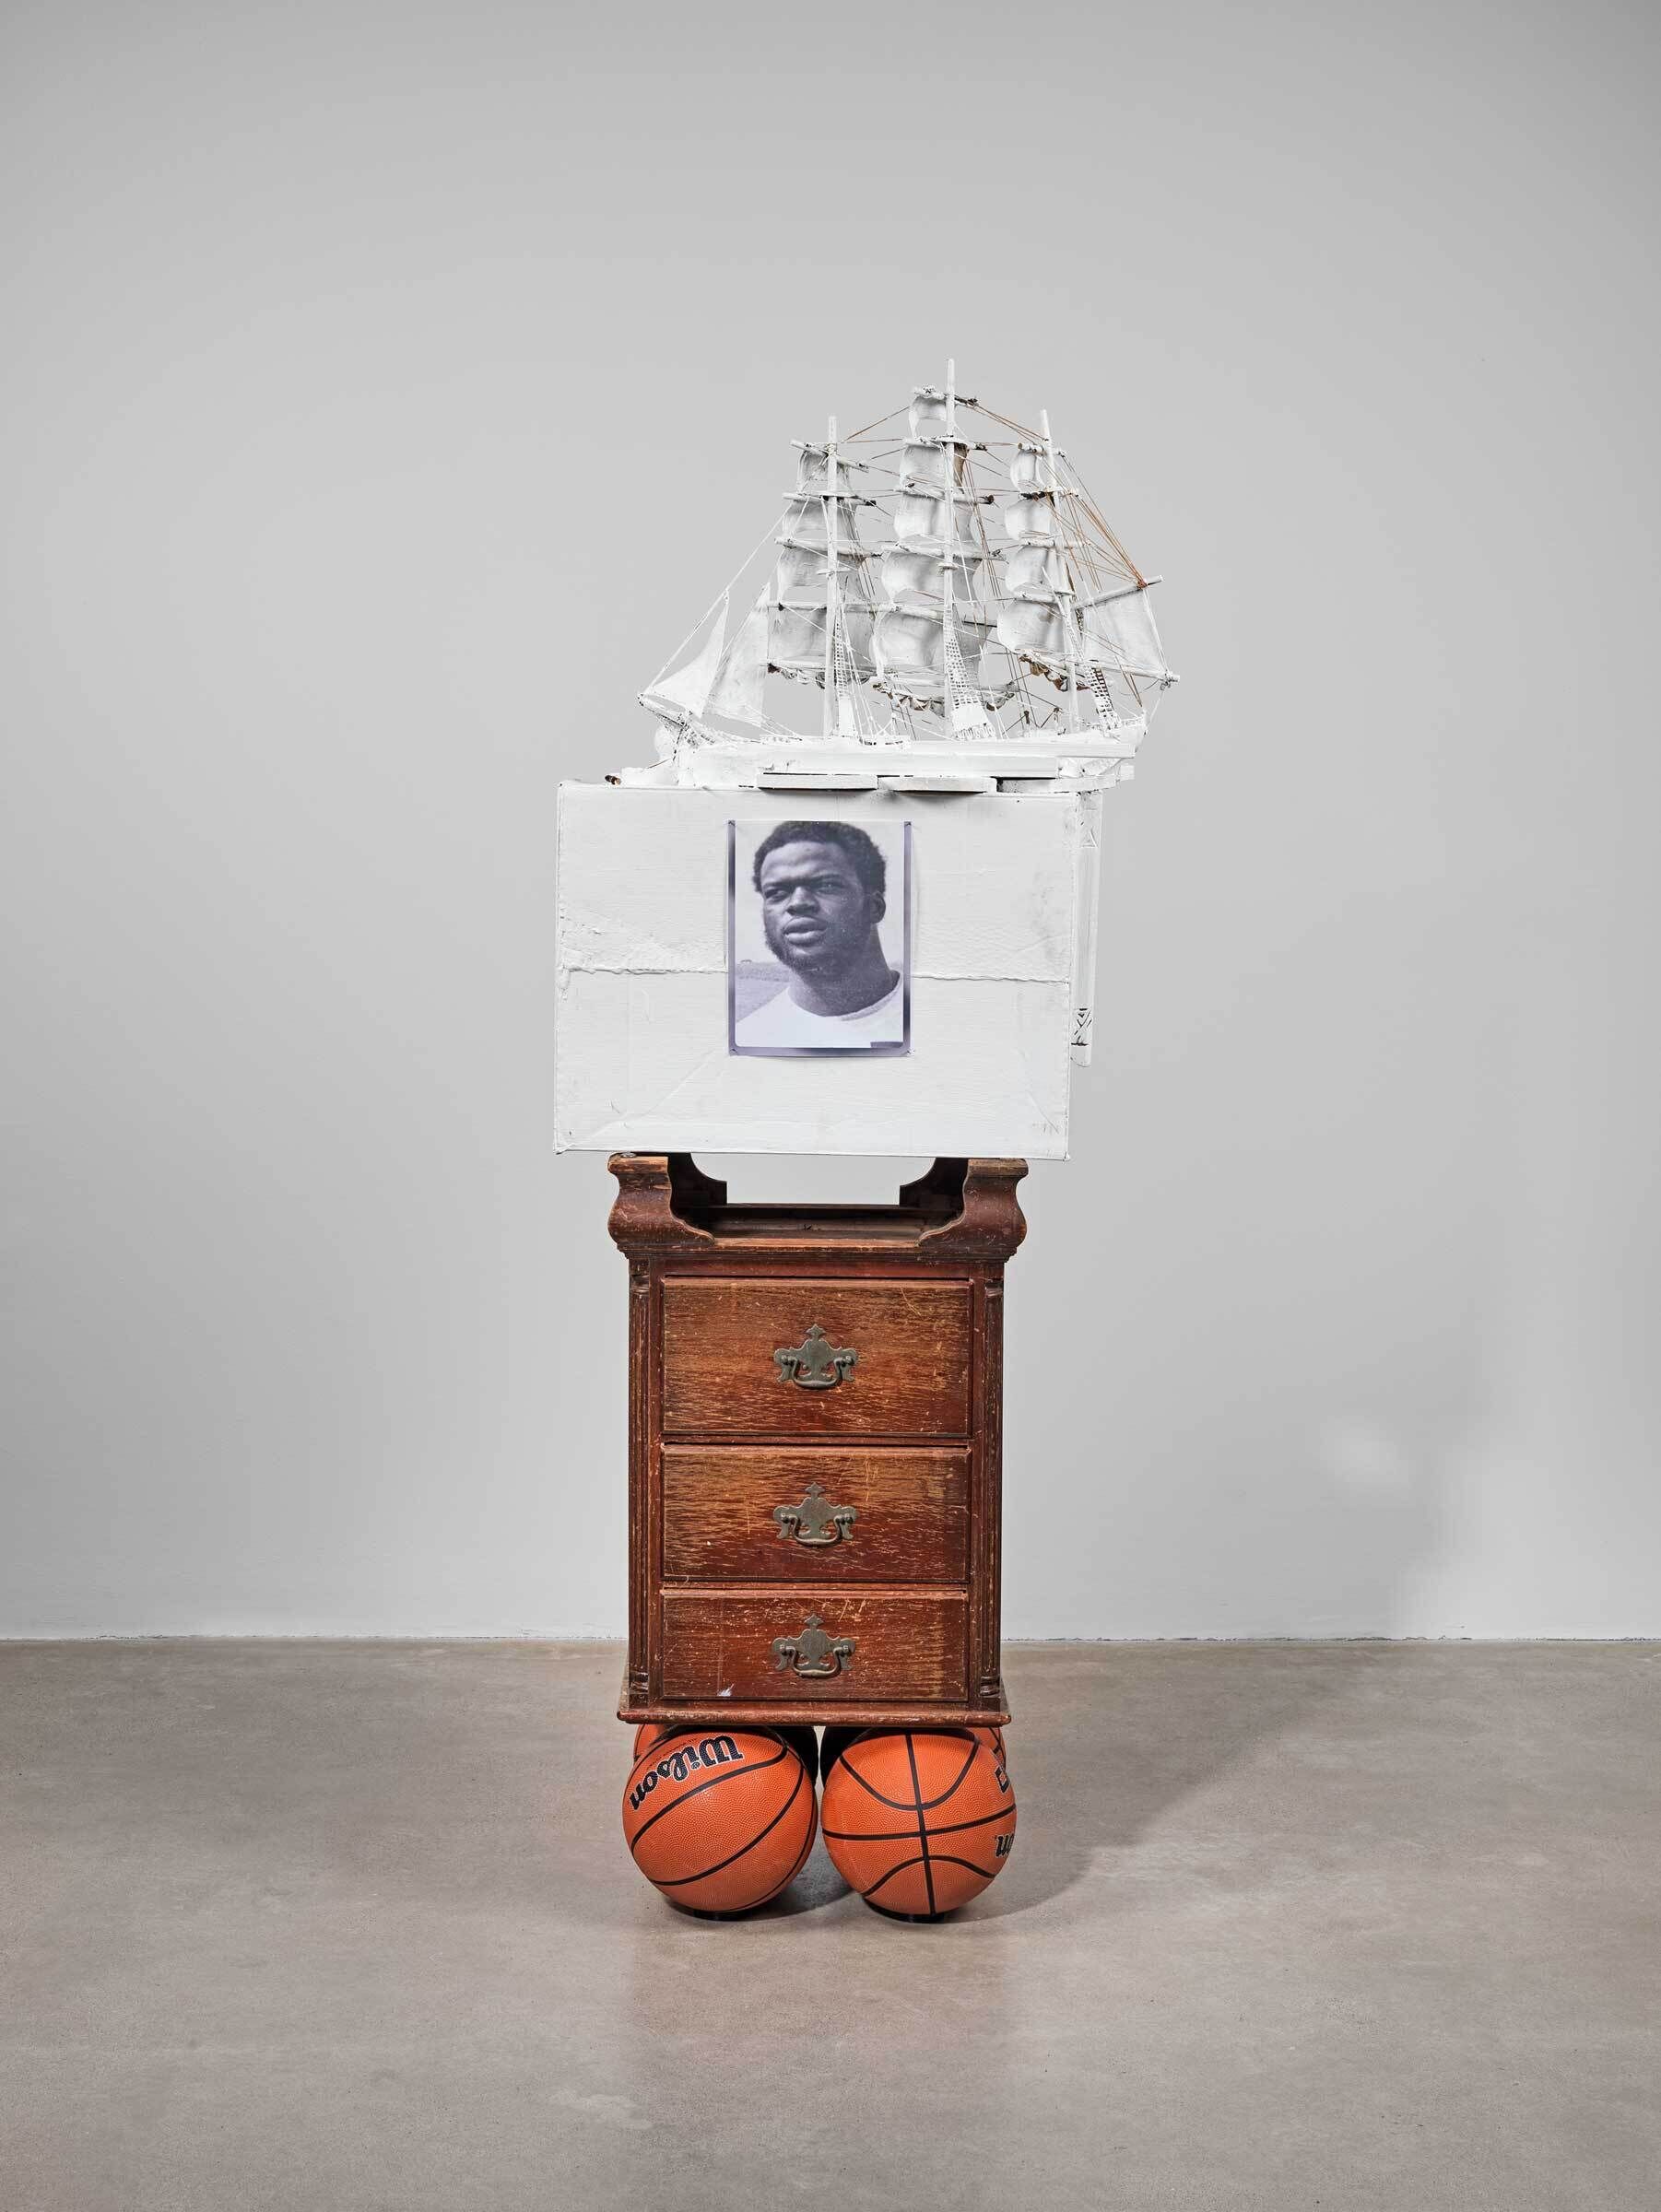 A sculpture consisting of four vertically stacked components, from top to bottom: a miniature ship, a white box with a black and white portrait of a dark skinned masculine figure, a worn wooden dresser, and four basketballs.